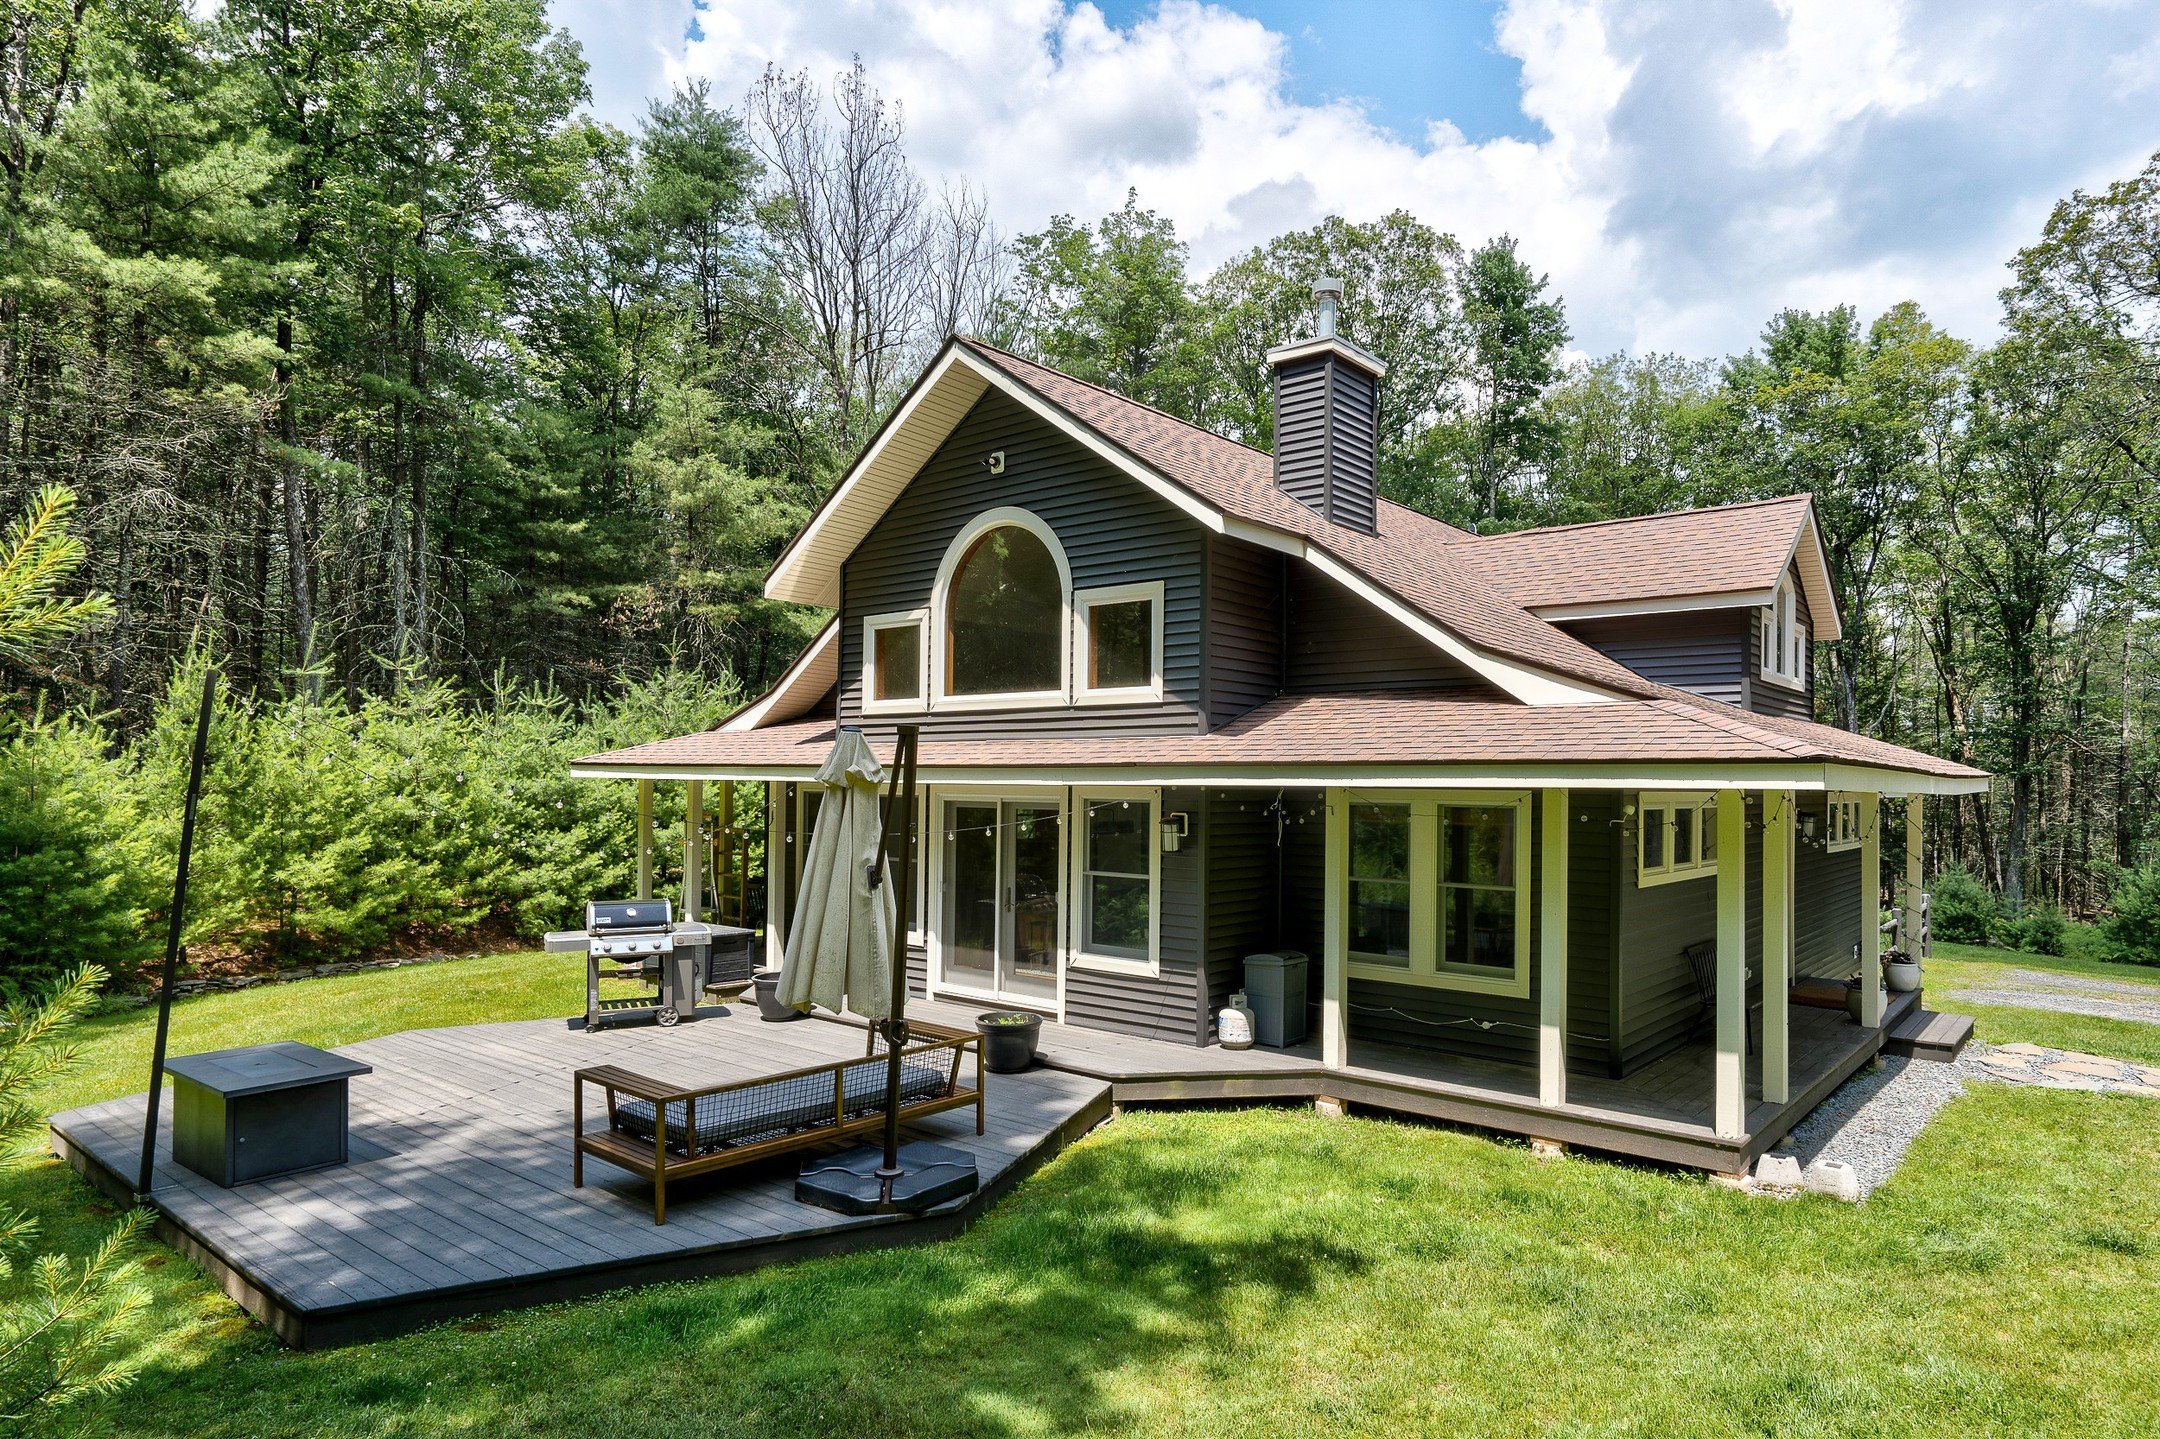 New to Market!

32 Timber Lake Dr
Yulan, NY 12792

Excited to bring to this one to you. It&rsquo;s a 2007 build &ndash; so think efficient systems (including a brand new boiler) keeping you snug-as-a-bug in winter, and cool-as-a-cucumber in the summe